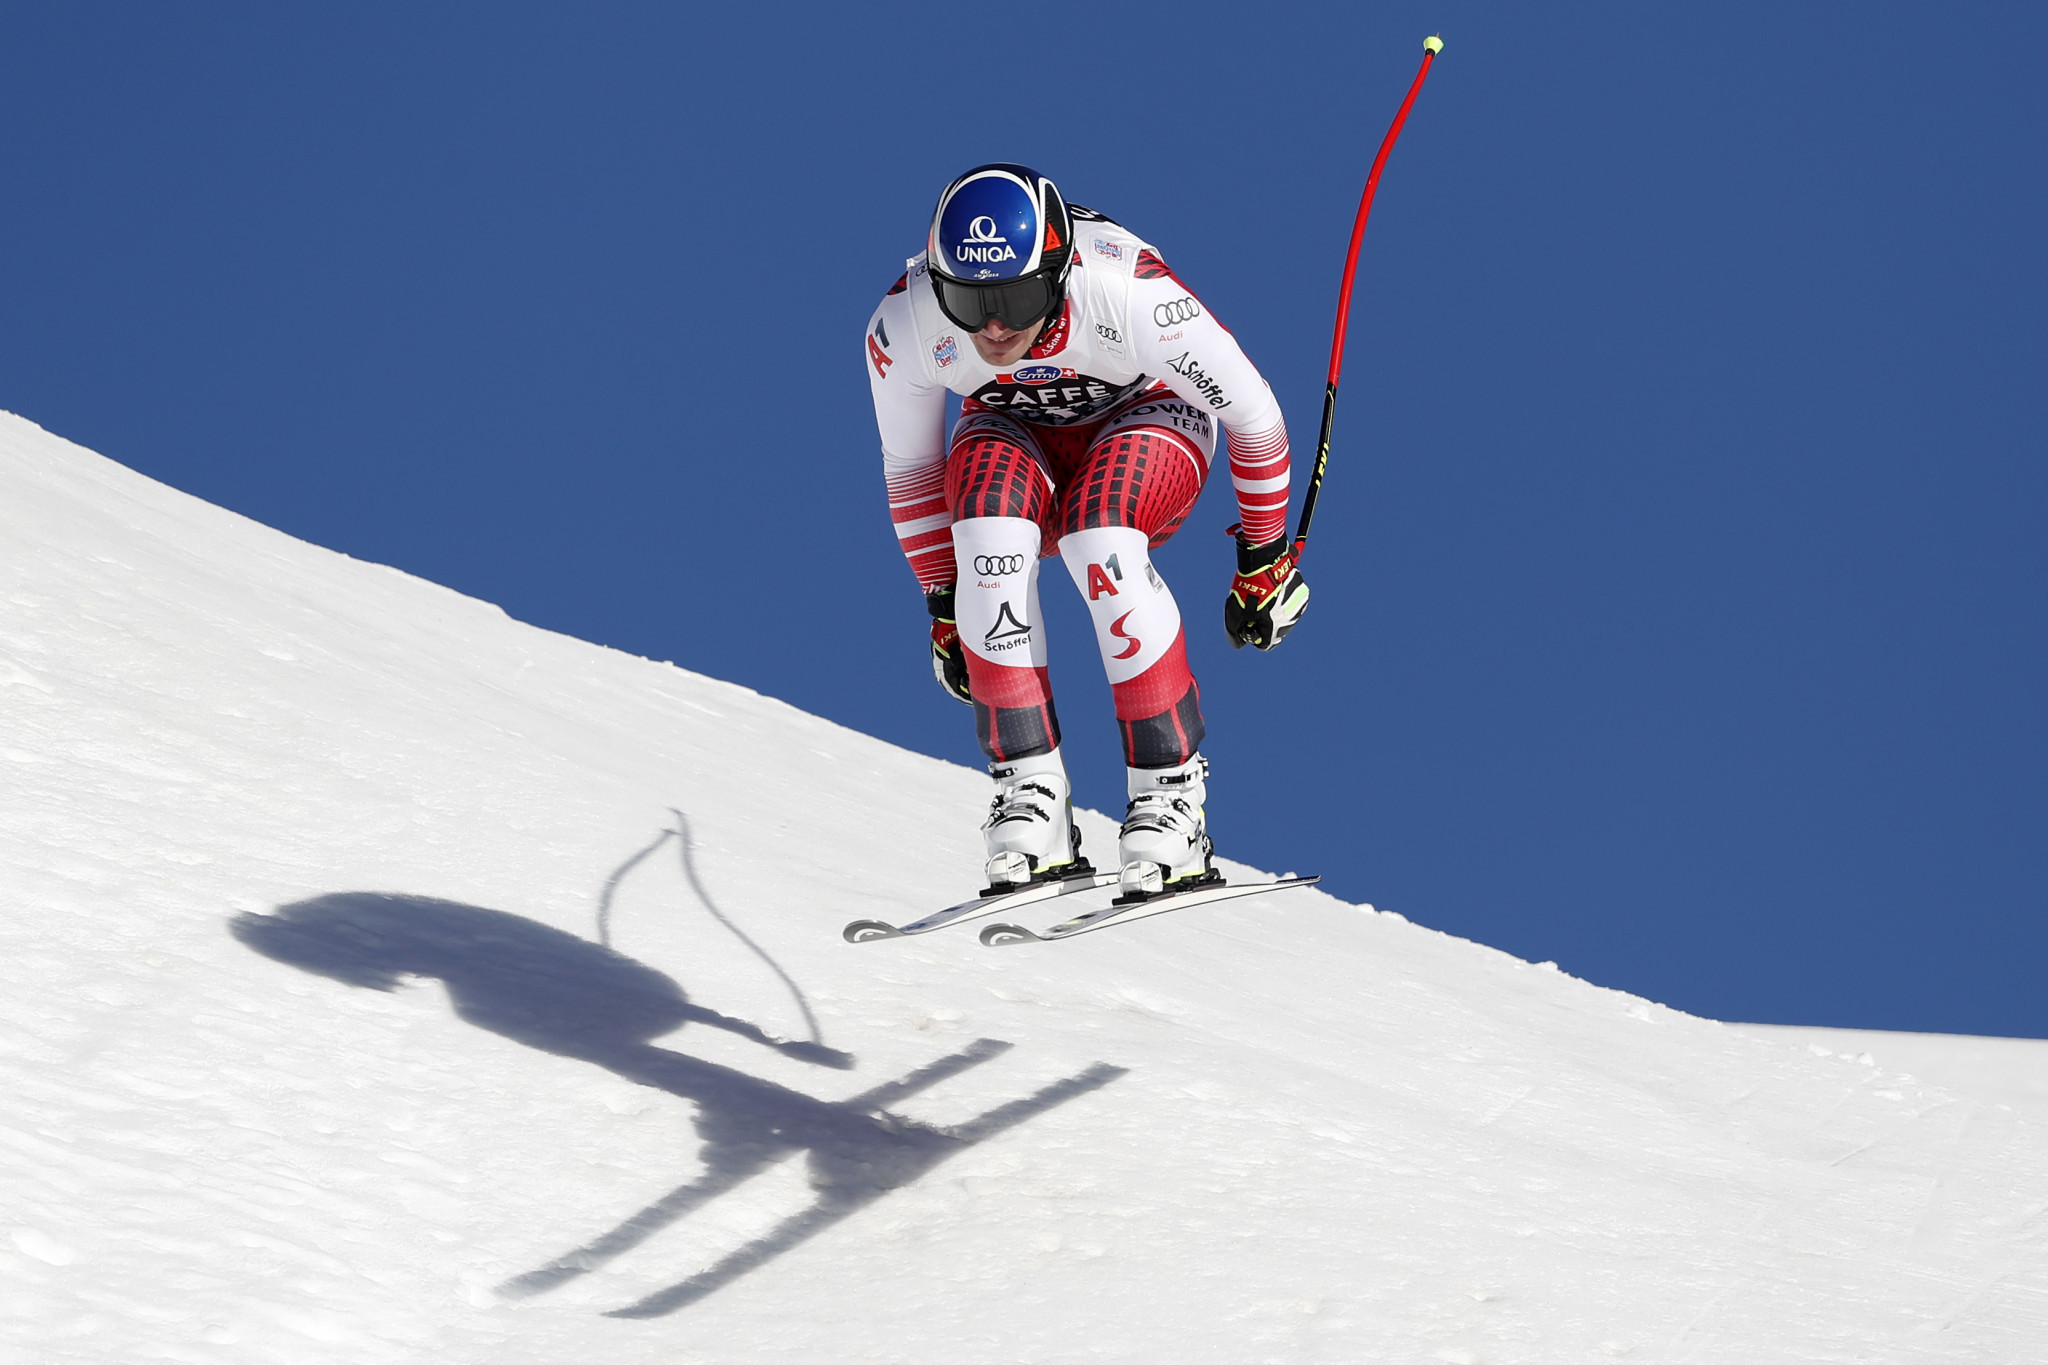 Matthias Mayer impressed in training for the FIS Alpine Ski World Cup event in the Swiss resort of Wengen ©Getty Images